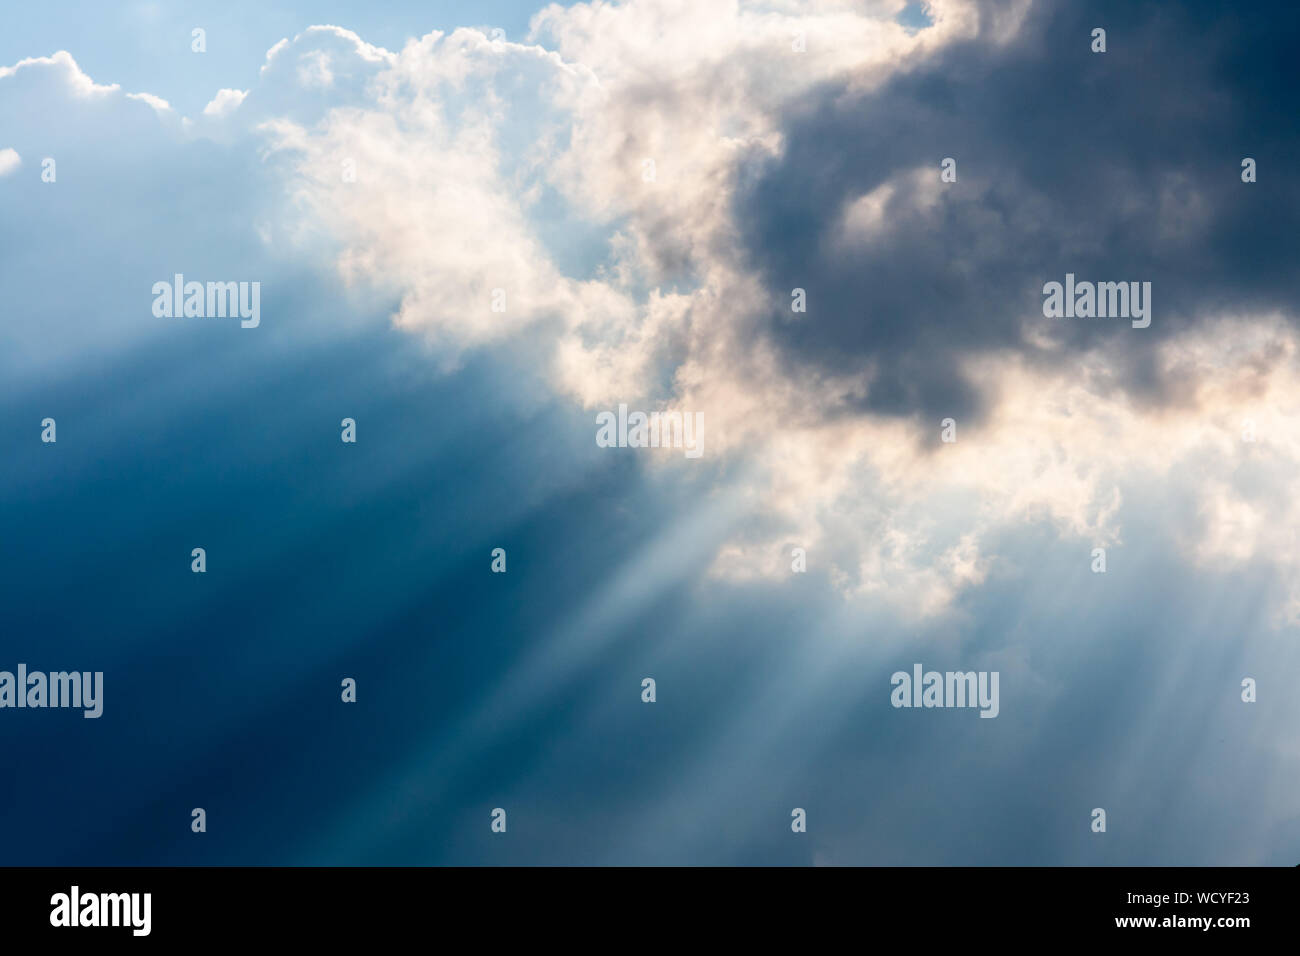 Low Angle View Of Sunbeam Streaming Through Cloud Stock Photo